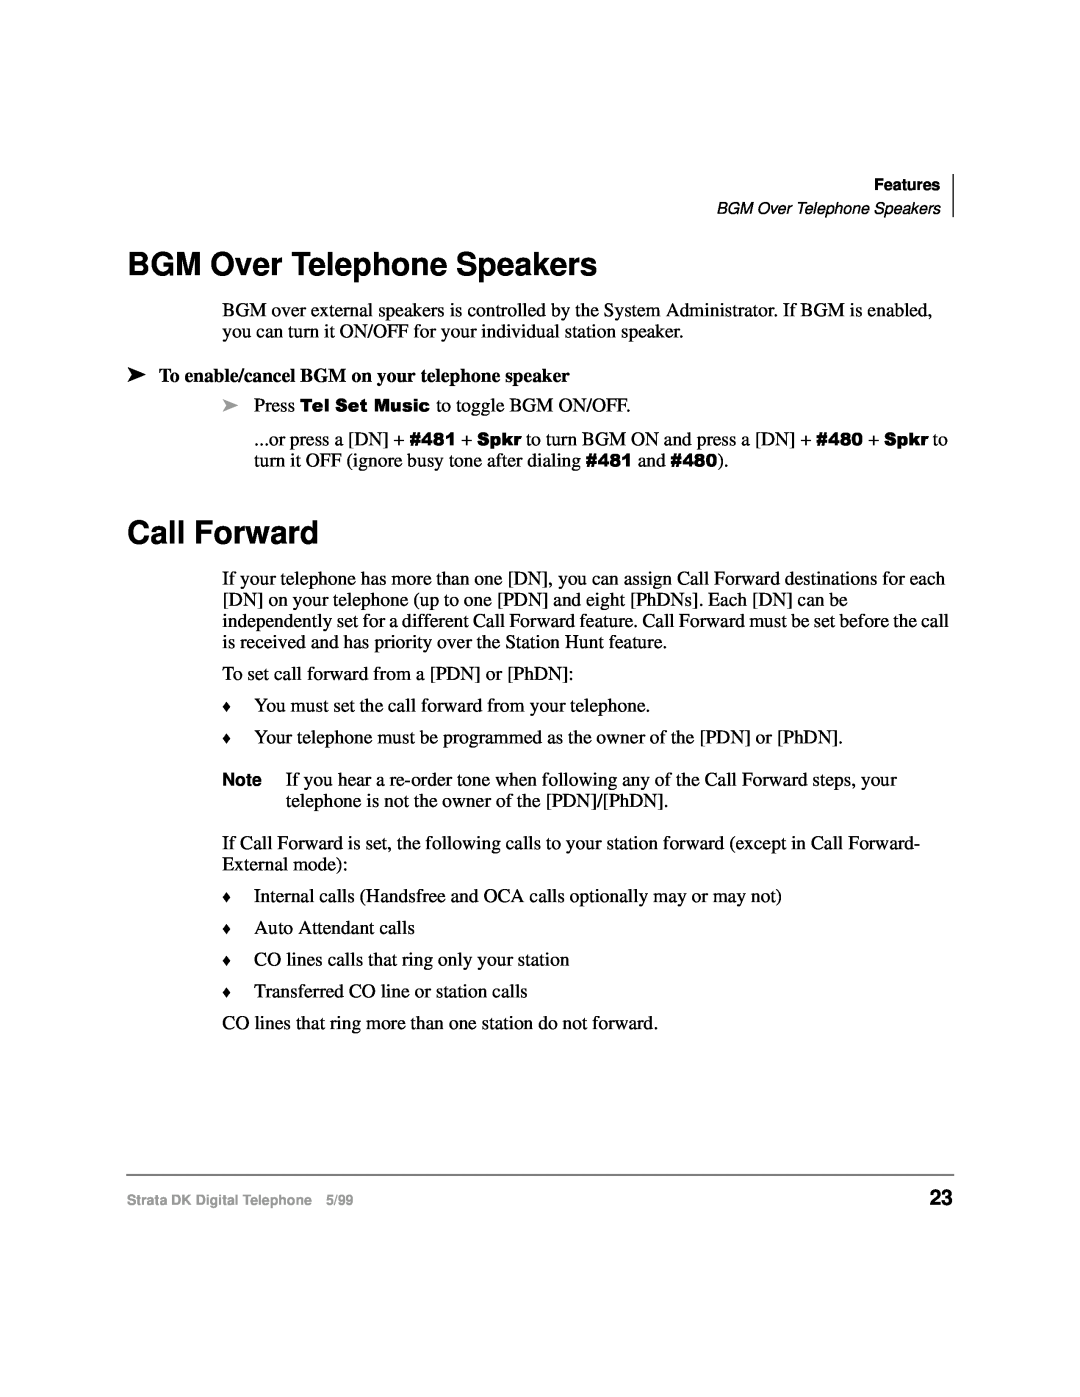 Toshiba CT manual BGM Over Telephone Speakers, Call Forward, To enable/cancel BGM on your telephone speaker 